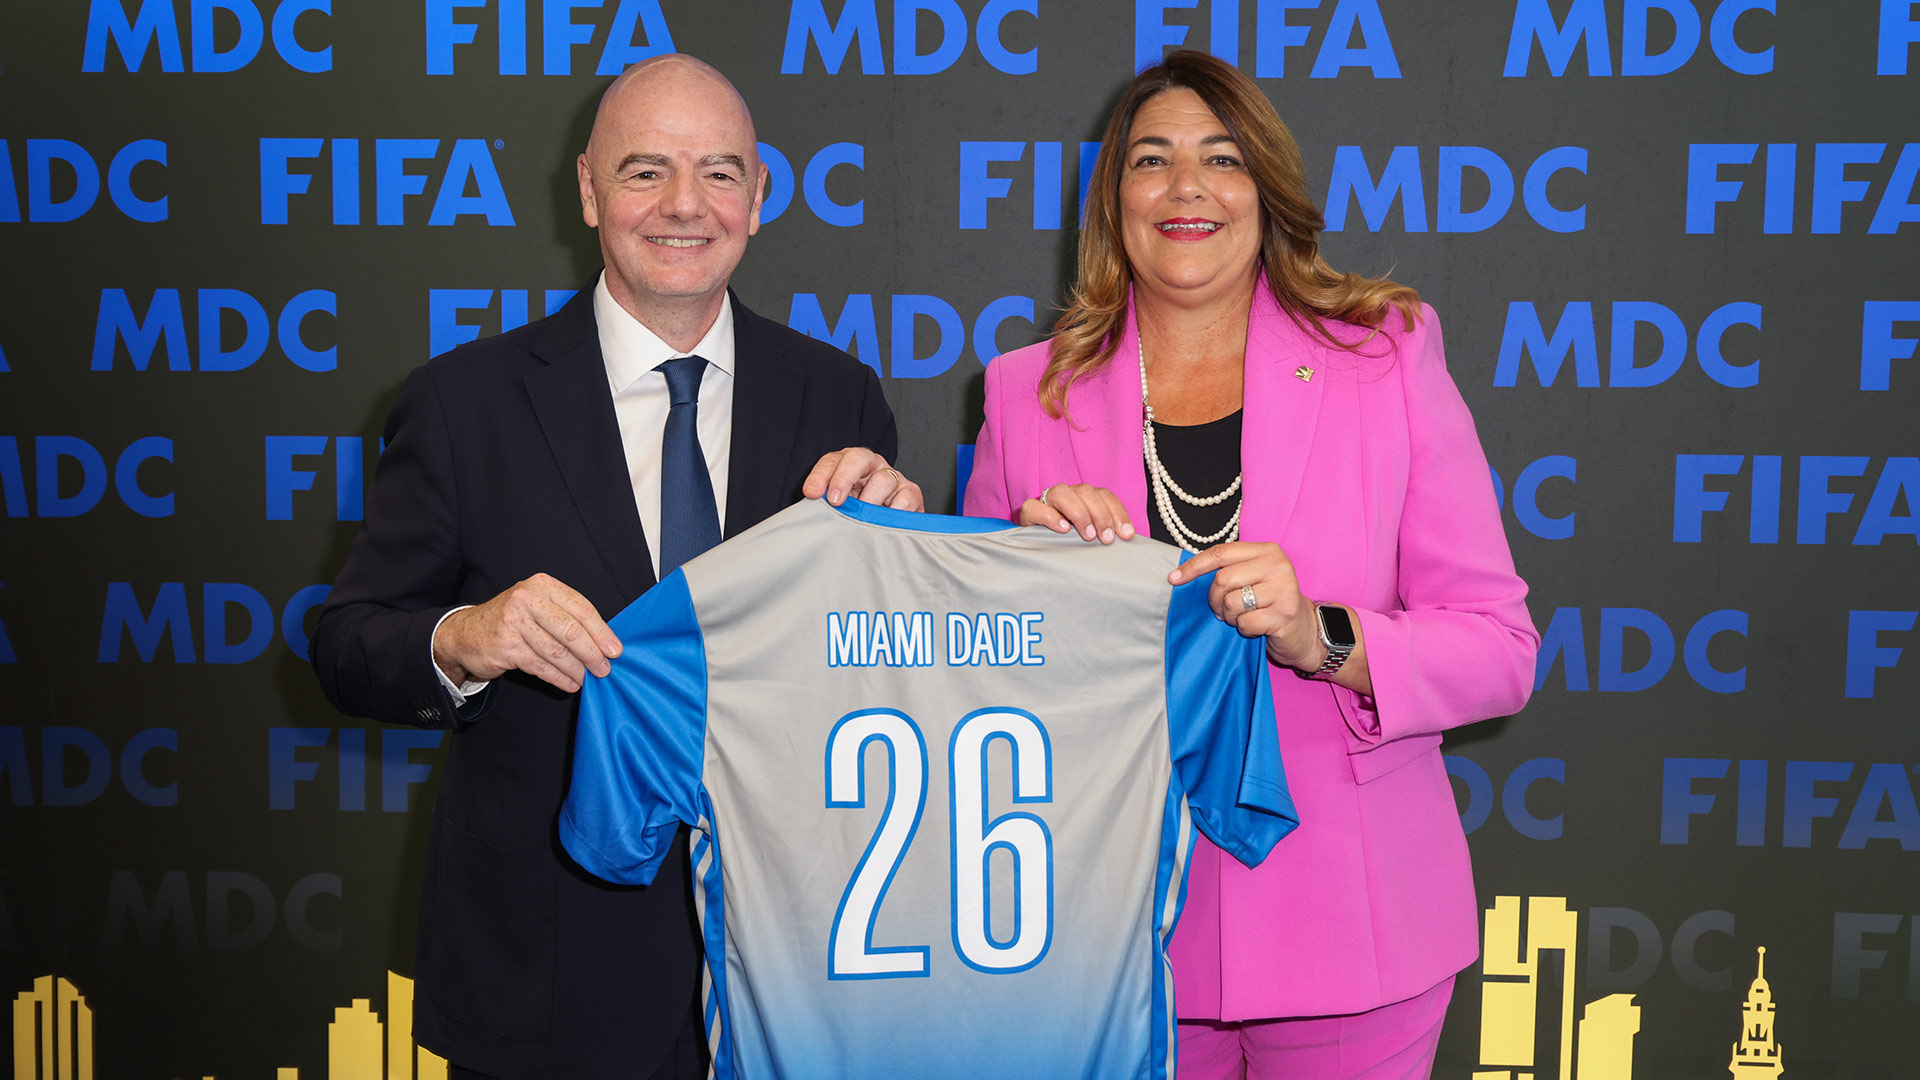 Madeline Pumariega, president of MDC with Gianni Infantino, president of FIFA